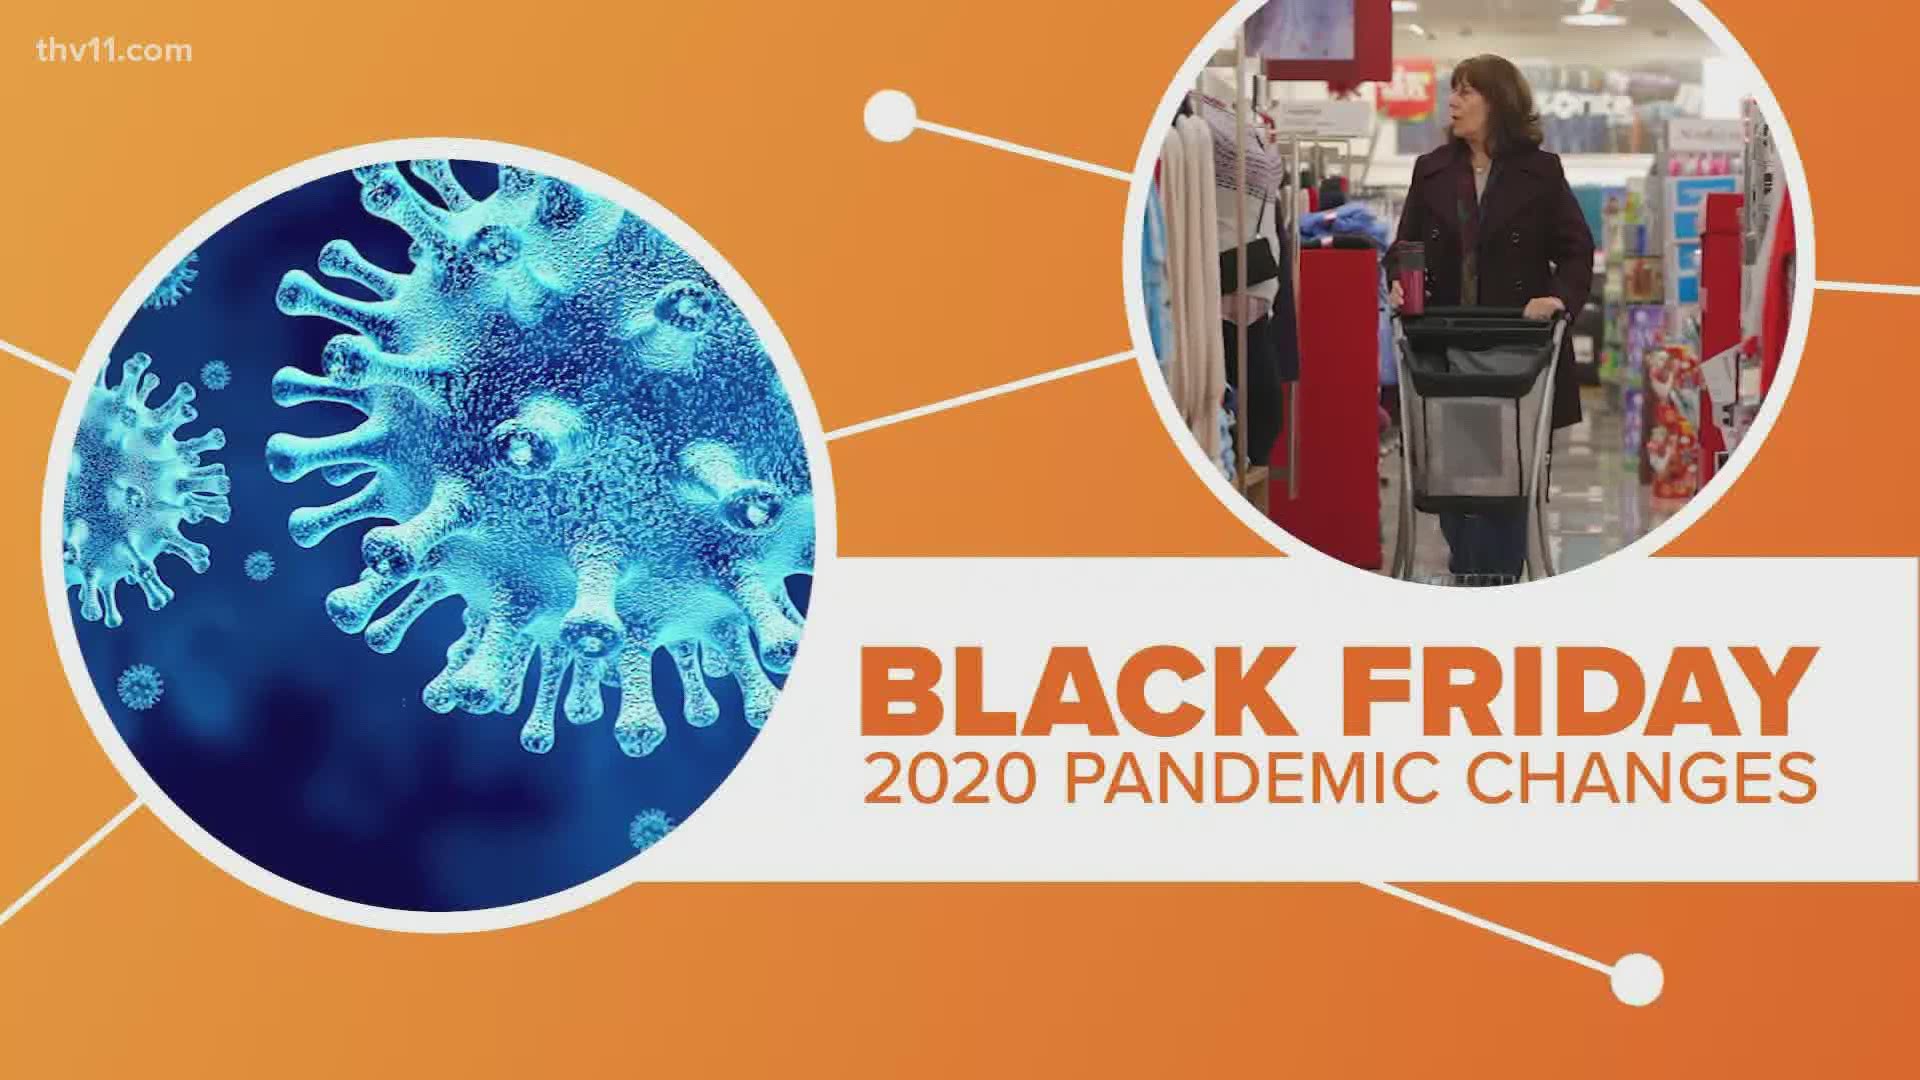 Just like everything else, holidays during the pandemic could look a little different. This year, there's no leaving the dinner table early for Black Friday.